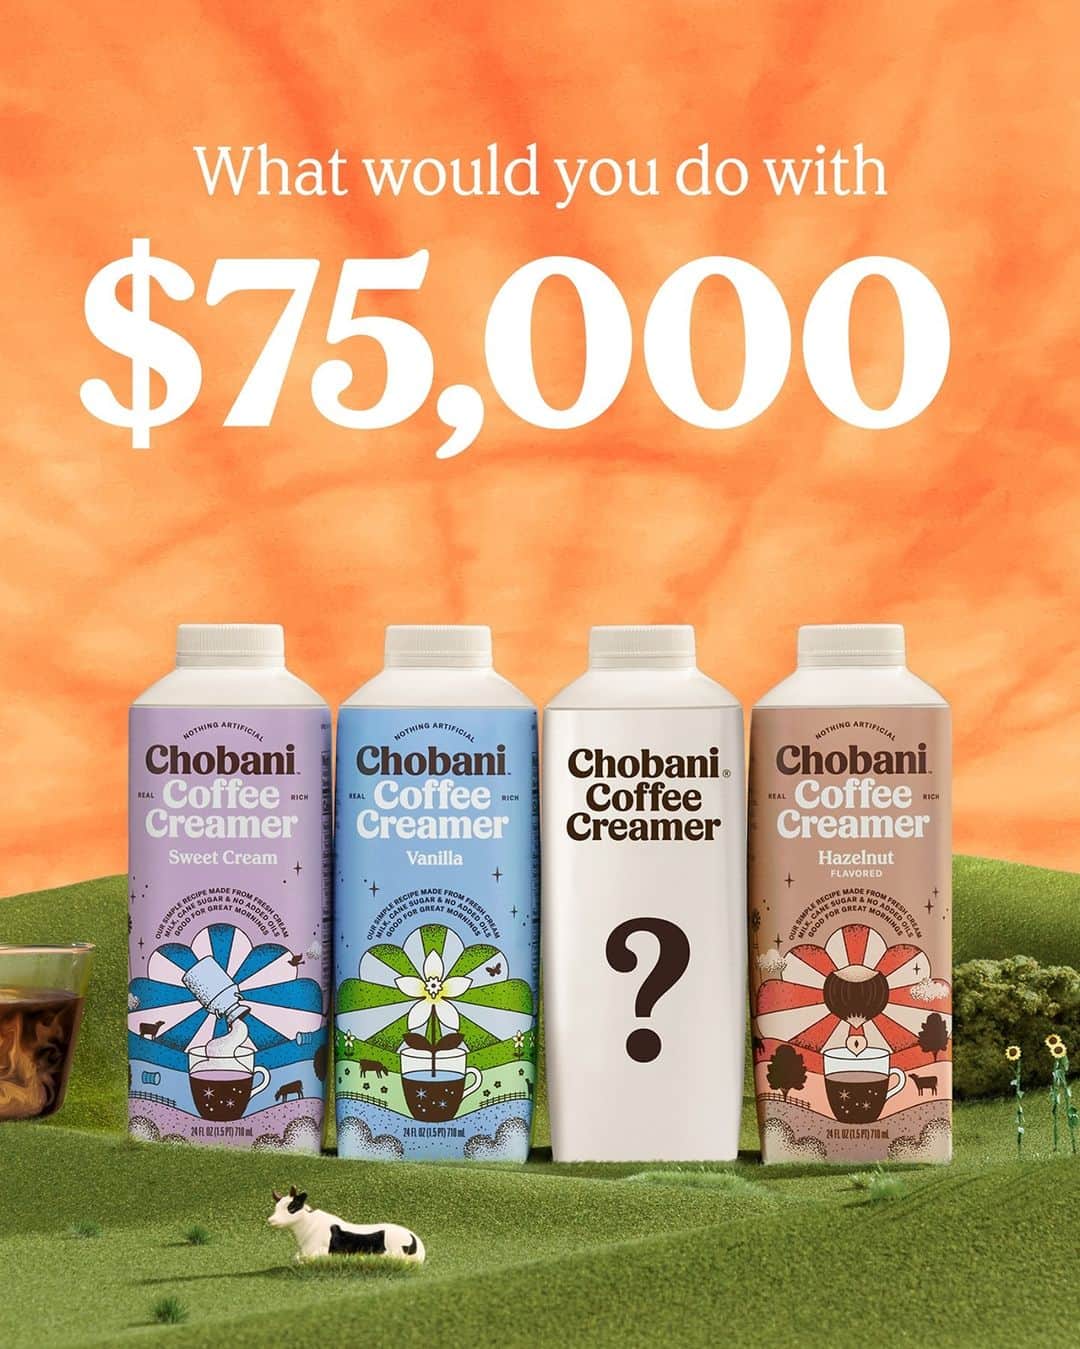 Chobaniのインスタグラム：「We know you know what you would do with $75,000 … but do we know your ChobaniCoffeeCreamer flavor? 📣 You have 3 days left to tell us your dream Chobani Coffee Creamer flavor for a chance to  win up to $75,000. Link in bio to enter ☝️ #chobanicoffeecreamer  * * NO PURCHASE NECESSARY. Enter Contest by: 2/28/21. To enter and for Official Rules, visit chobanicoffeecreamer.com/.」